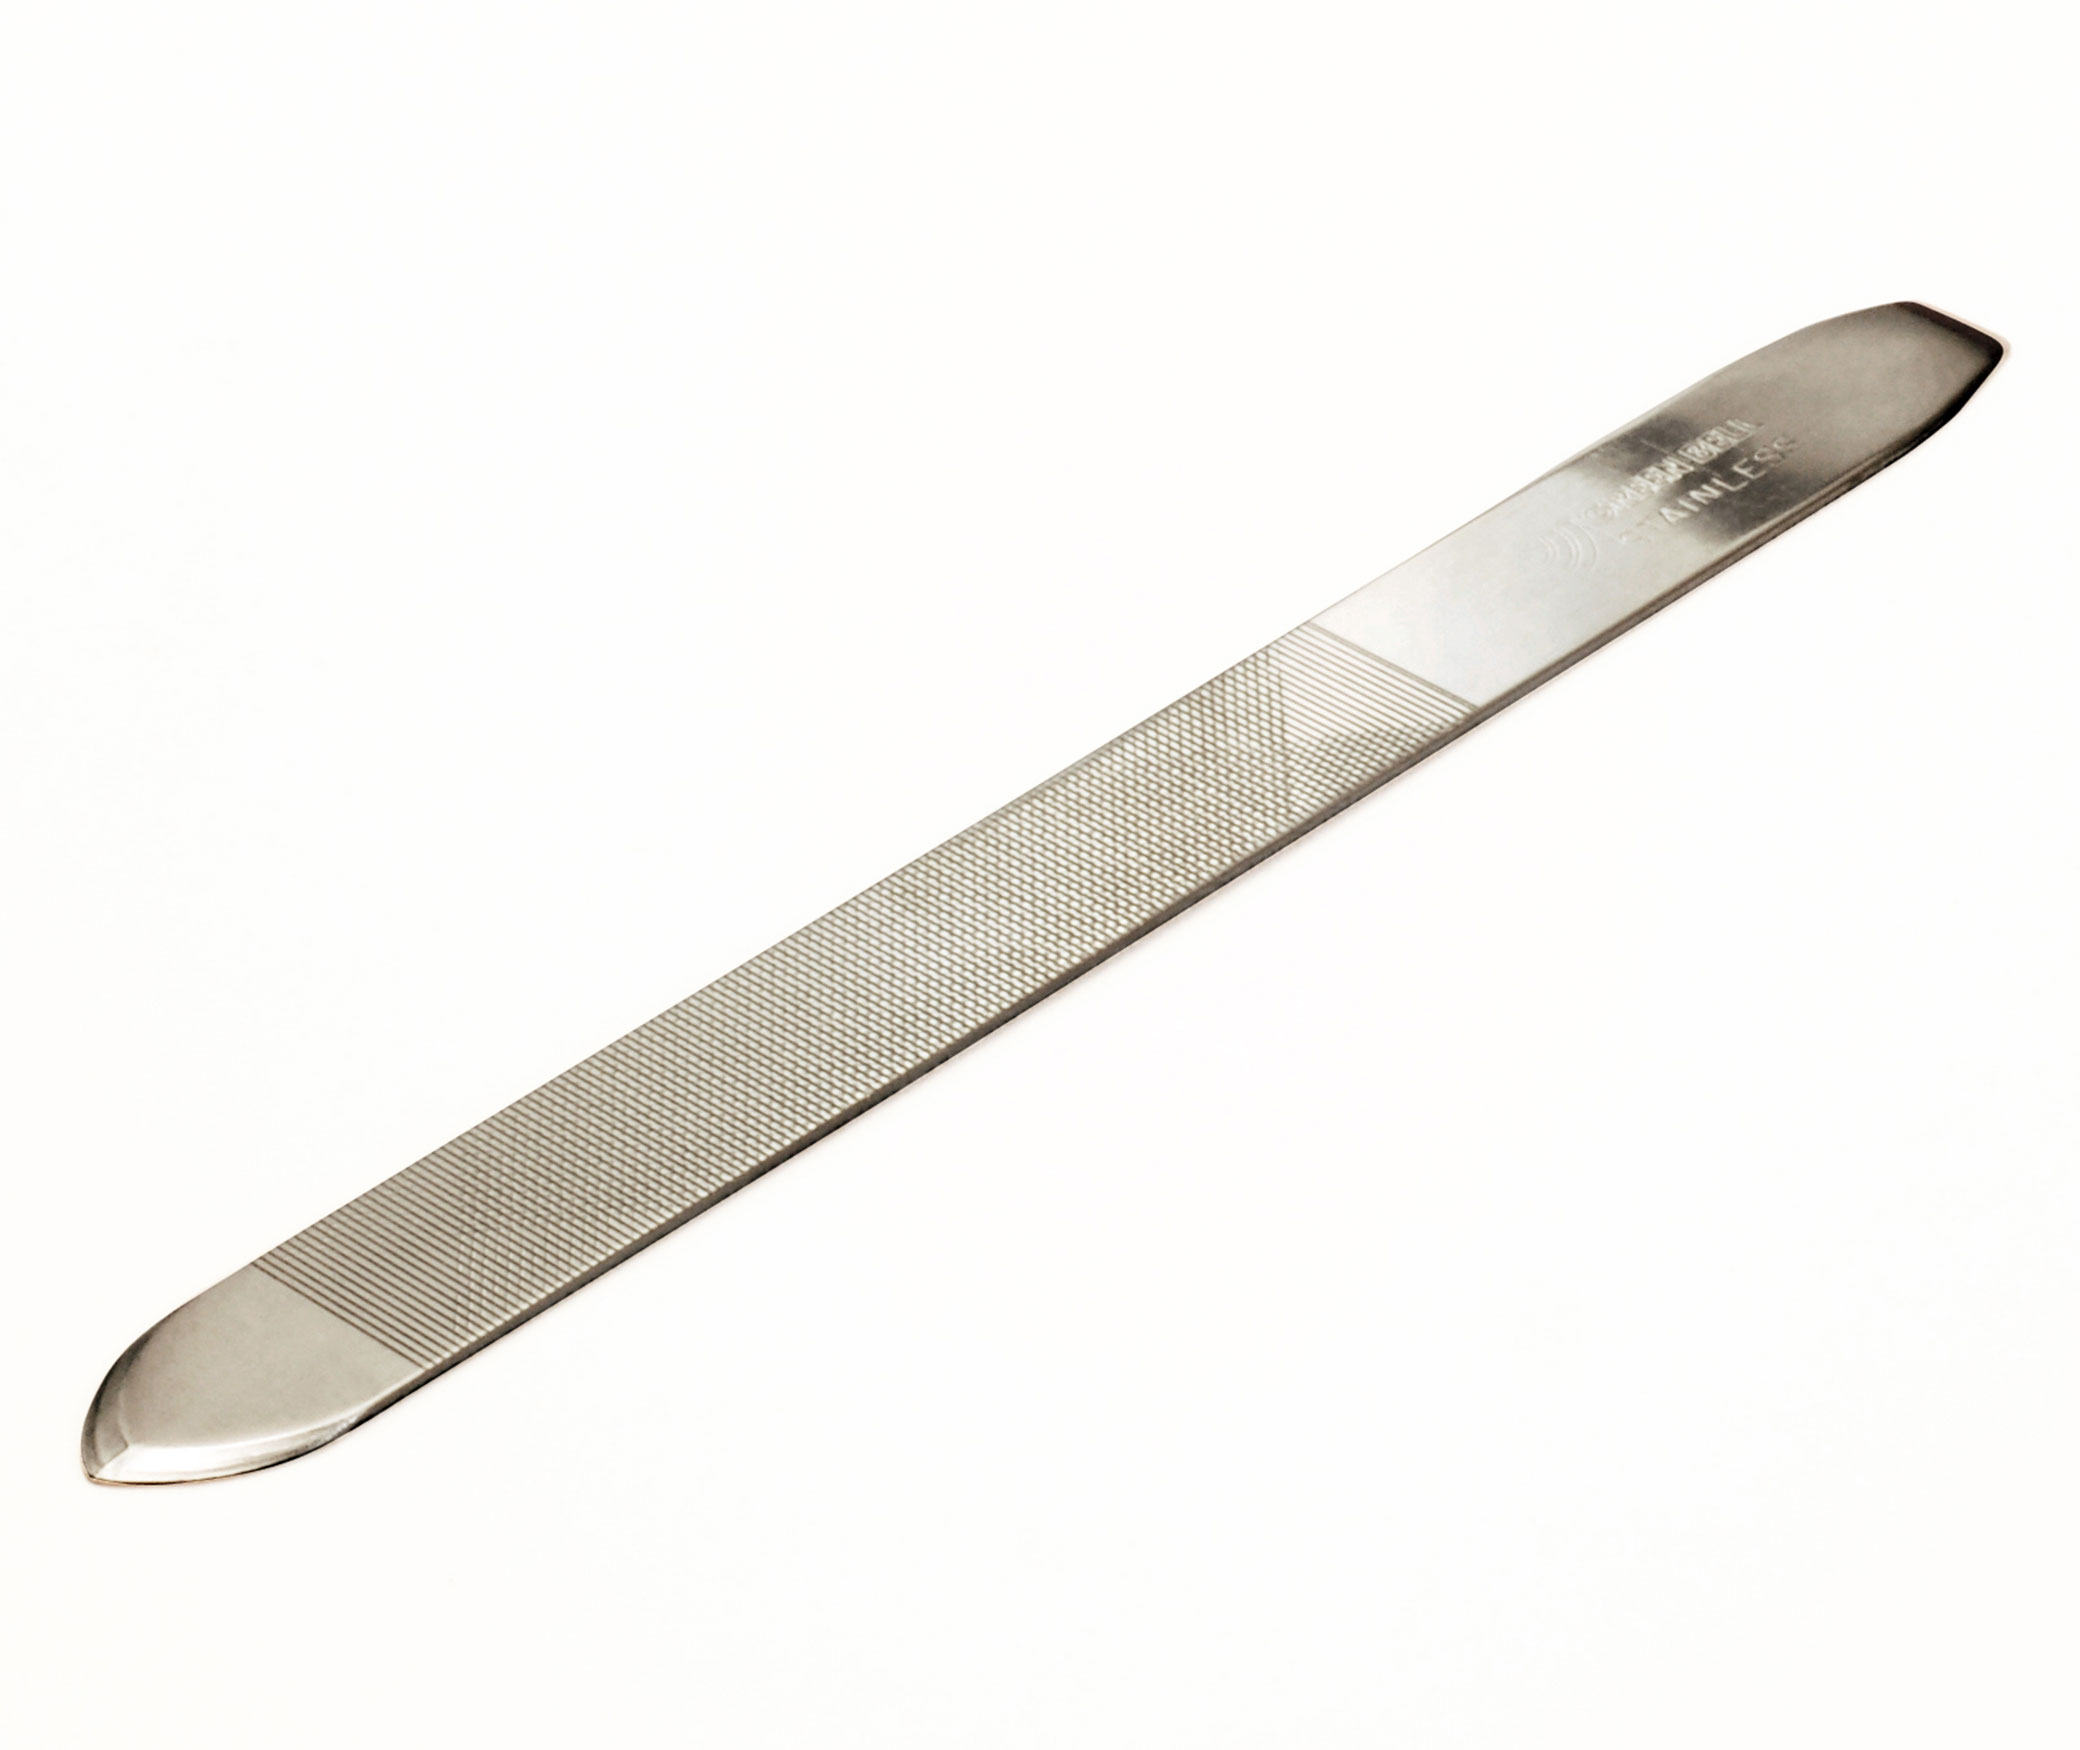 Seki Edge Nail File with Pusher (SS-402) nail cleaner